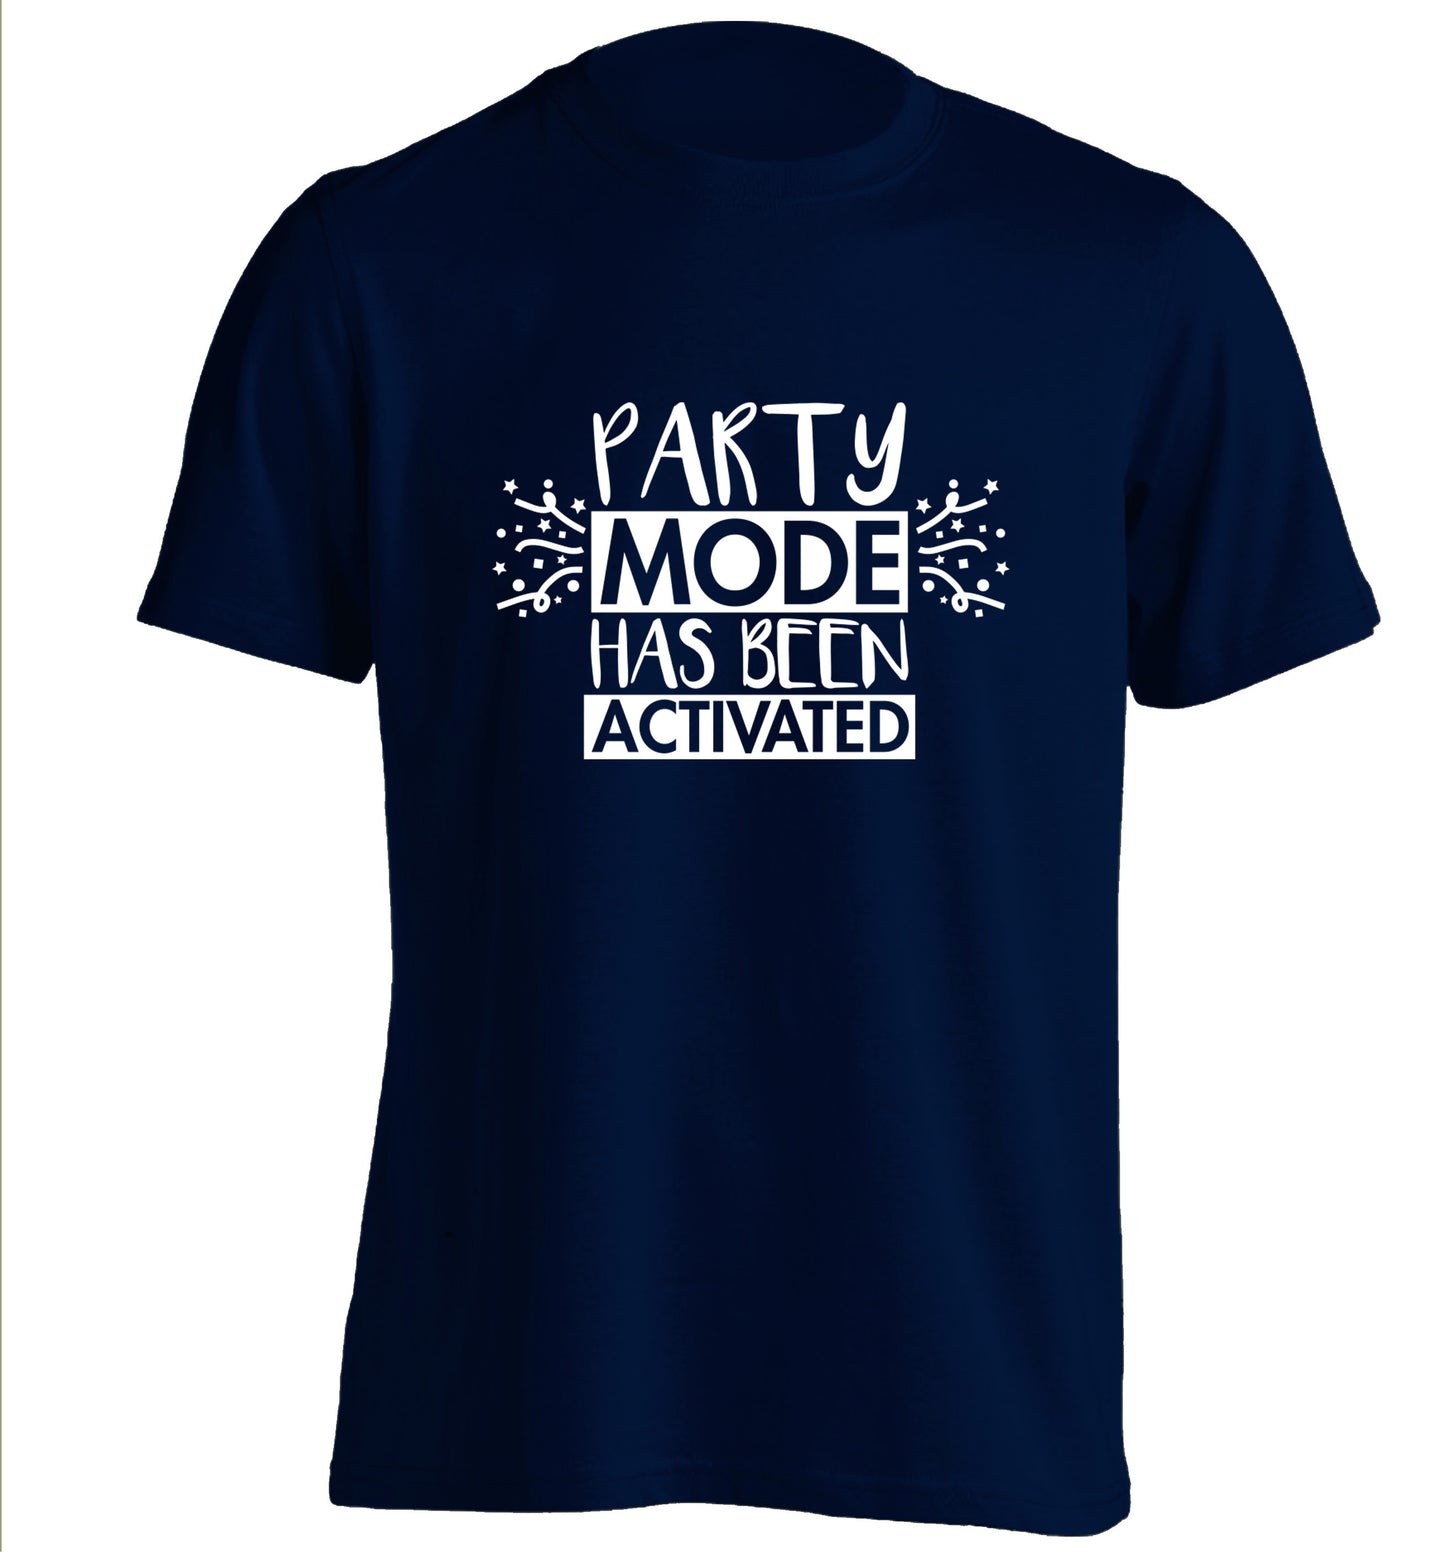 Please do not disturb party mode has been activated adults unisex navy Tshirt 2XL